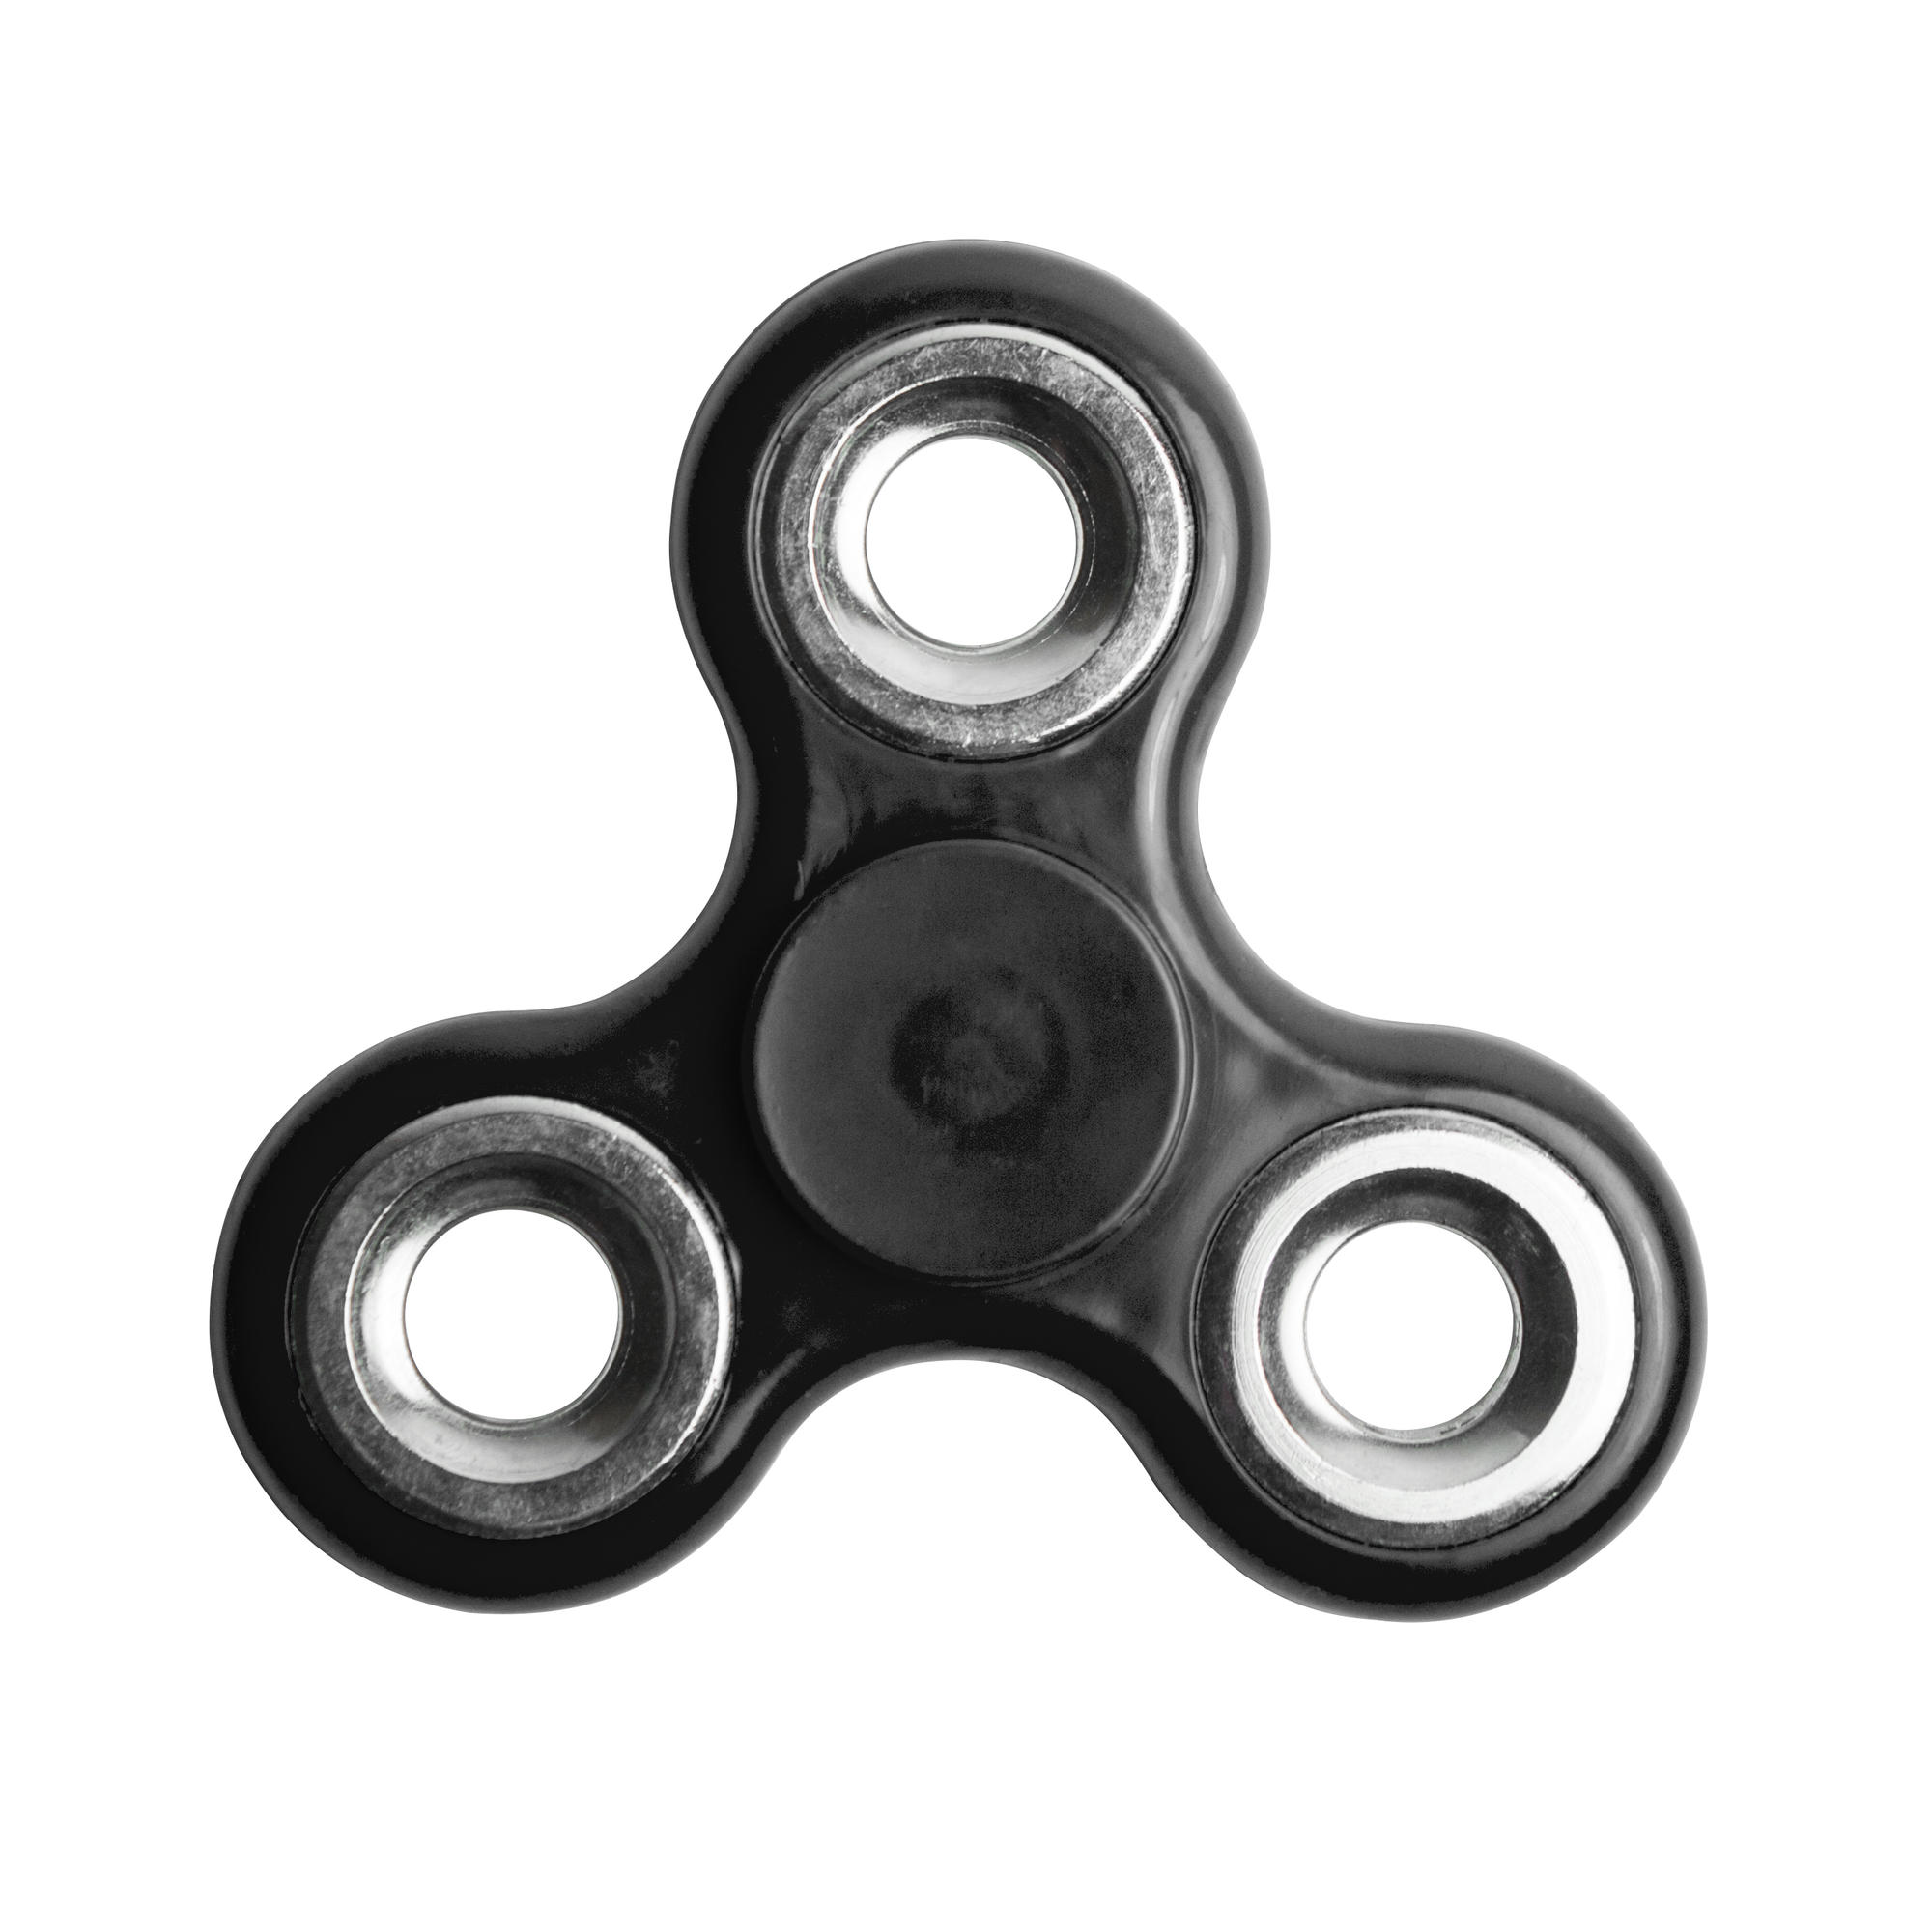 Focus Fid Spinner Stress and Anxiety Reliever Toy